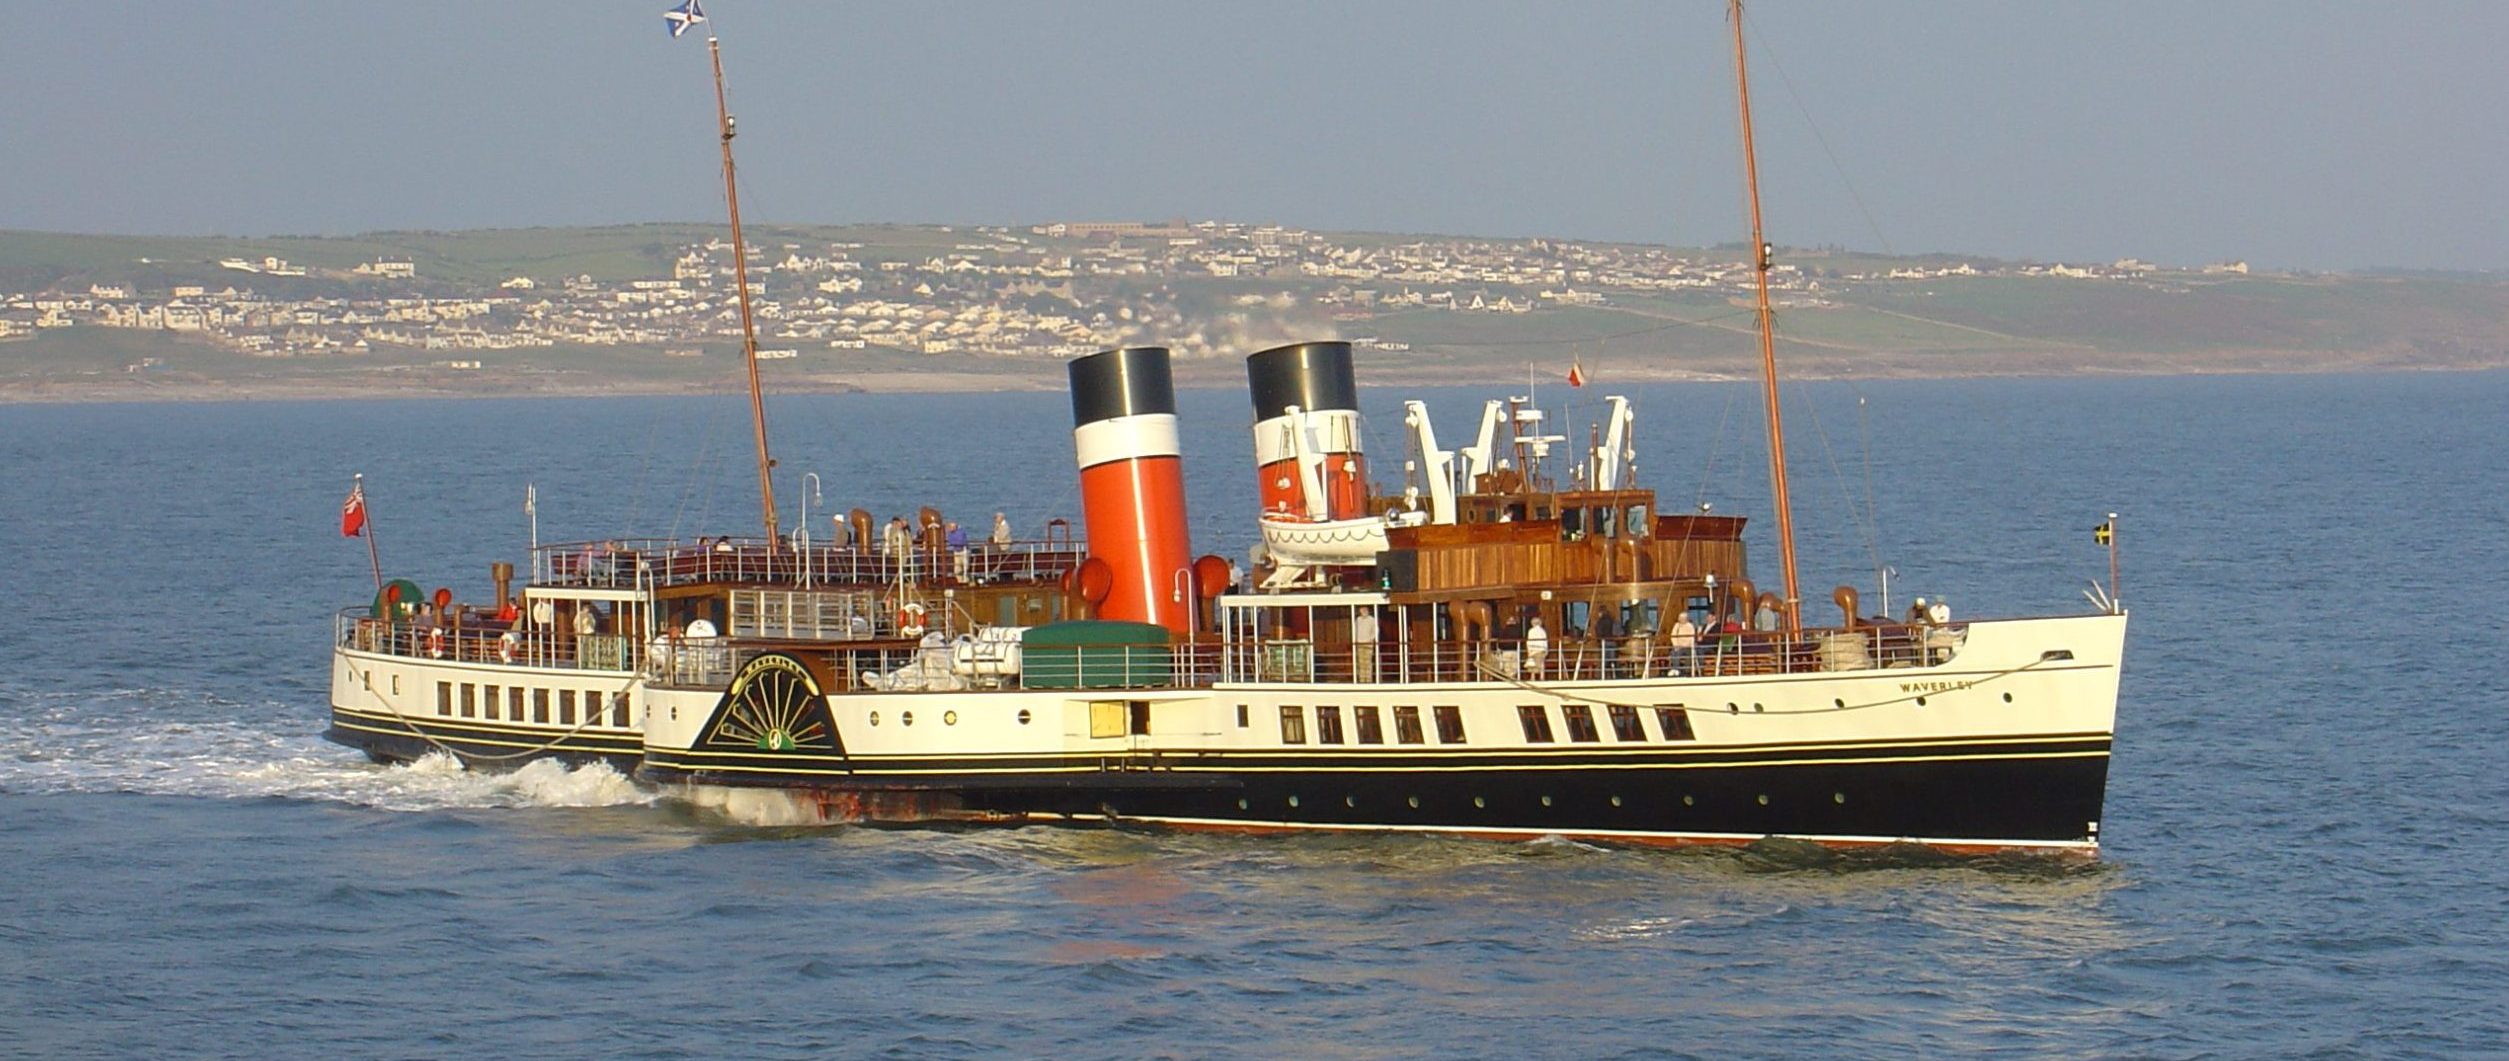 waverley excursions today